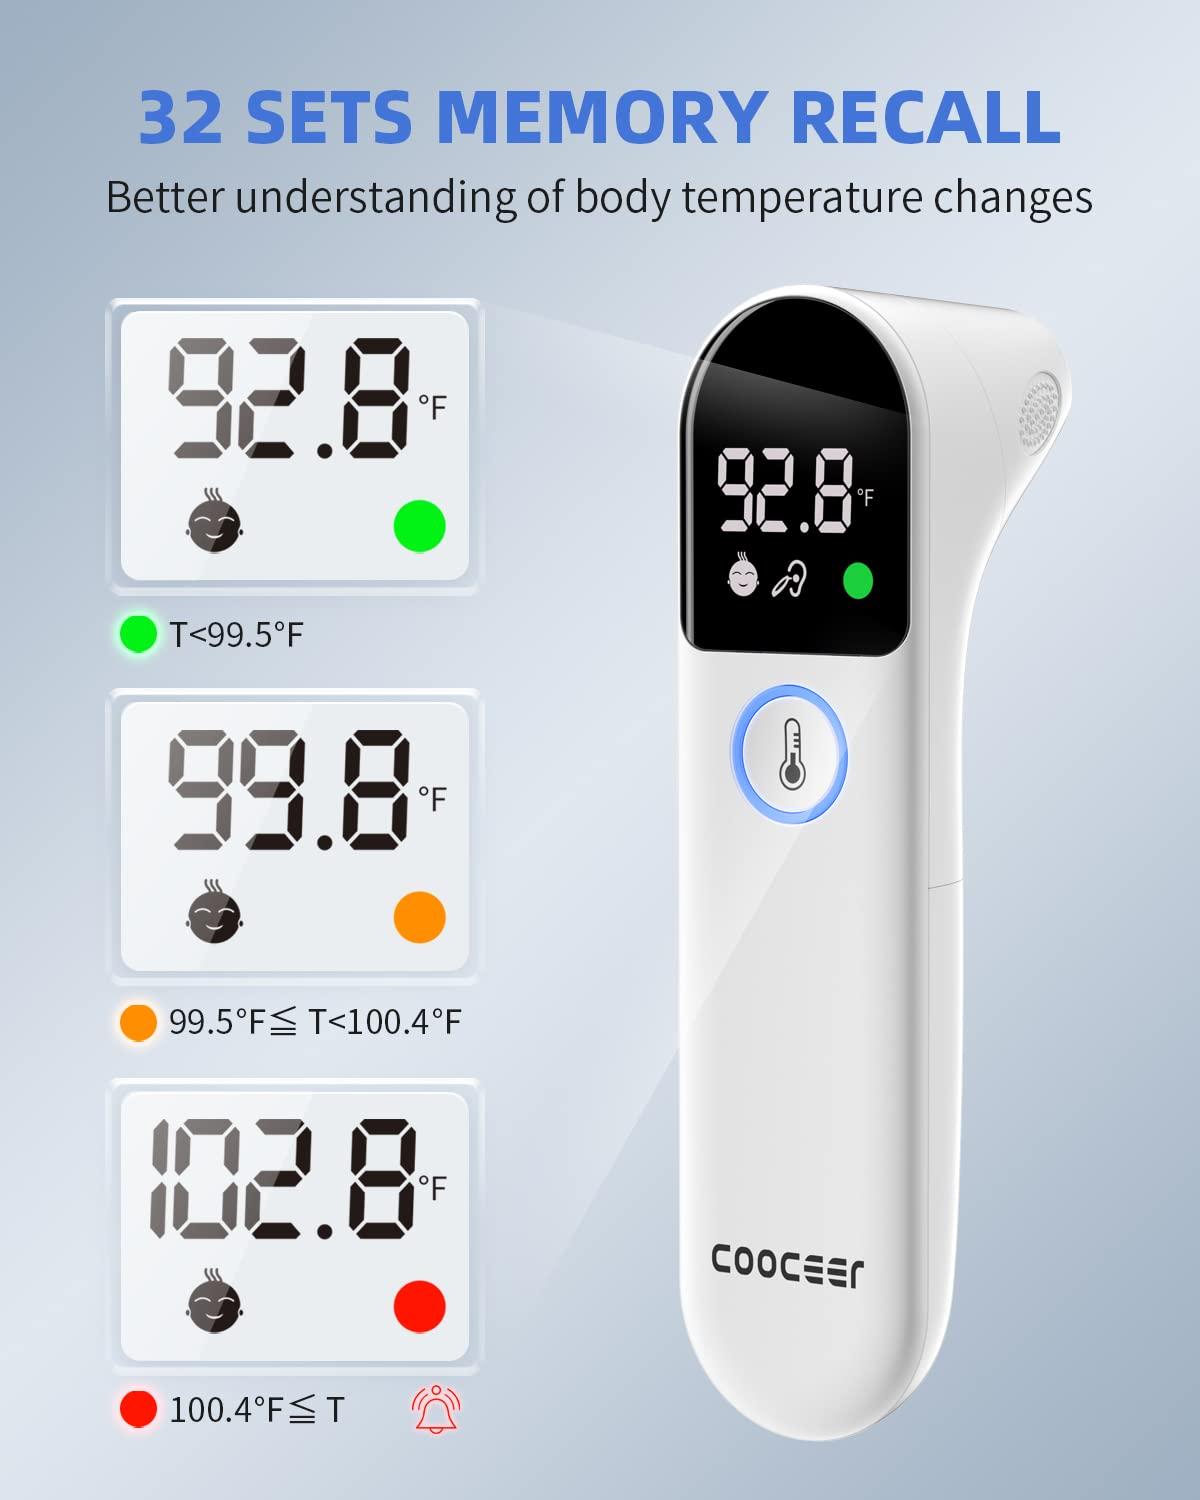 Contactless Digital Forehead Thermometer, Fast 1 Second Readings for Body  or Object Temperature, Backlit Display, Fever Alarm Beep and Color, Memory